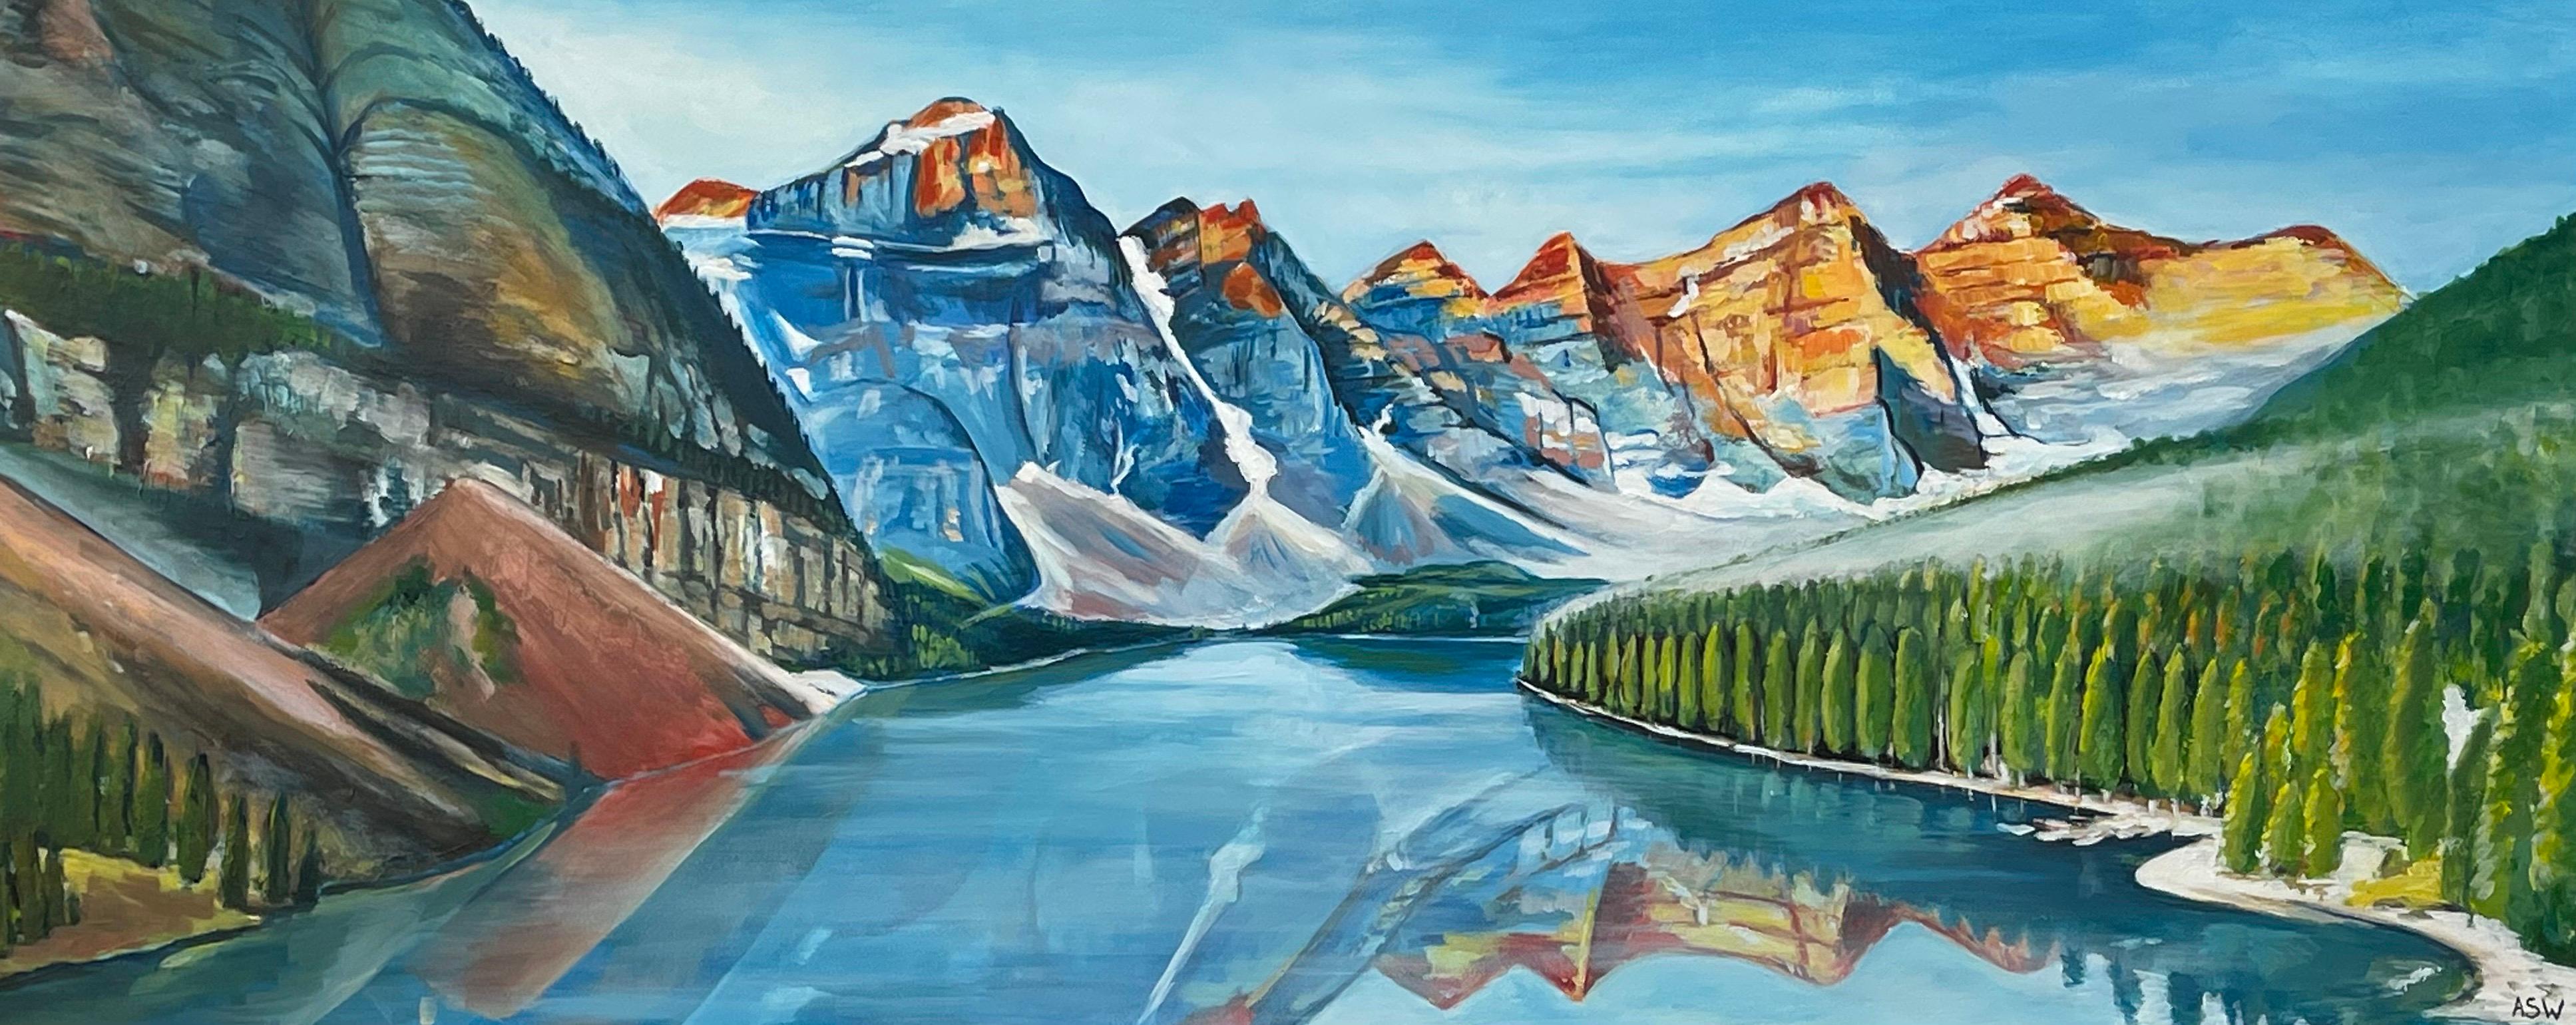 Modern Landscape Painting of Lake Alberta Canada by Contemporary Artist - Gray Abstract Painting by Angela Wakefield